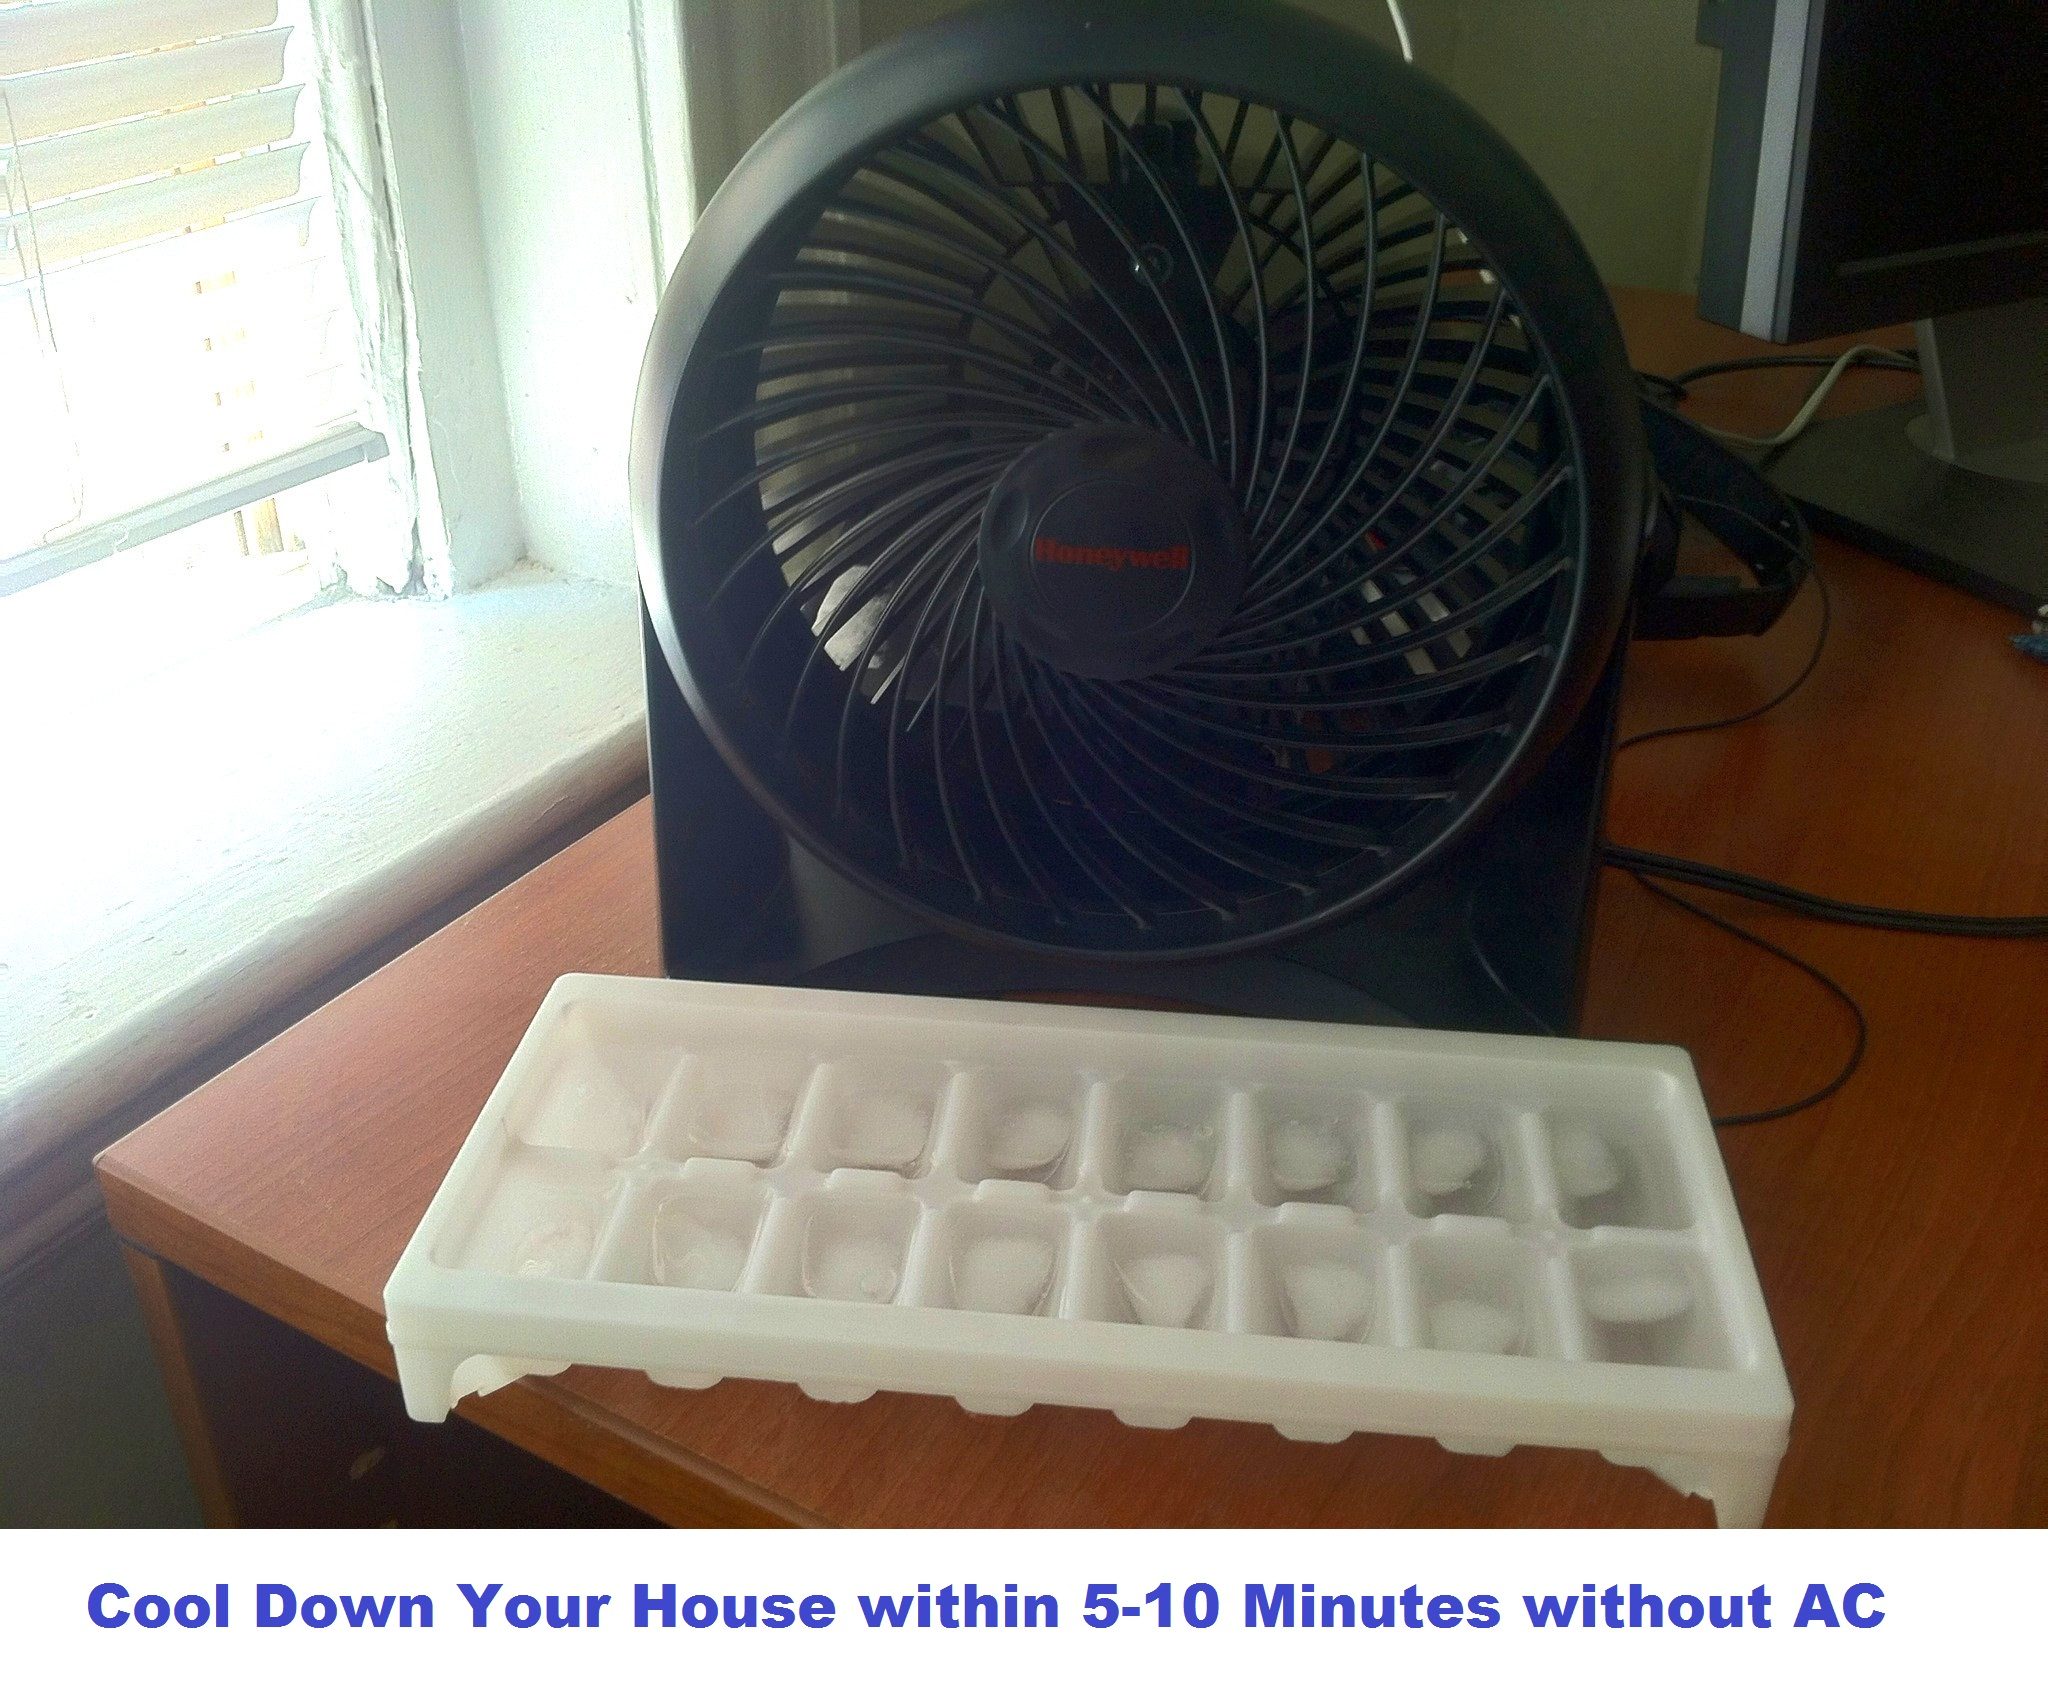 Know A Great Way To Cool Down A House In 5 Minutes Without